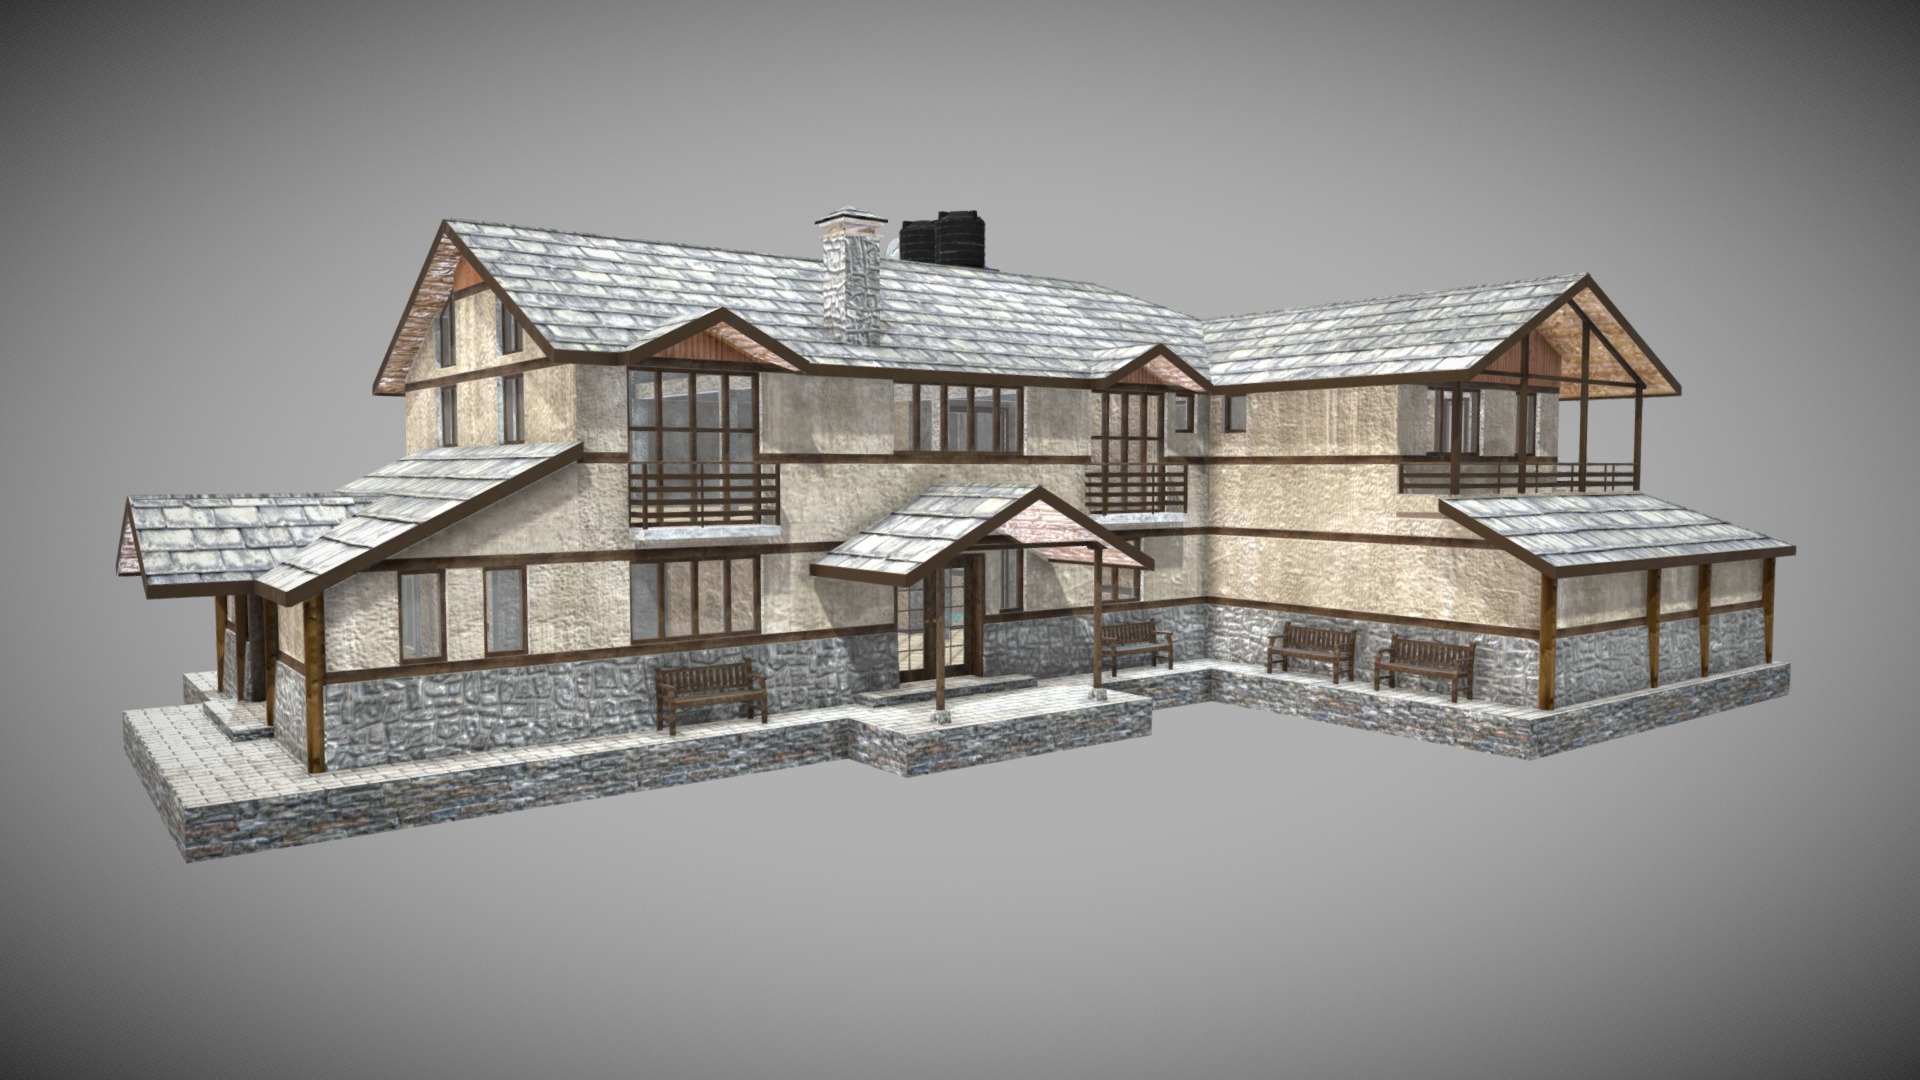 3D model Big Building - This is a 3D model of the Big Building. The 3D model is about a sketch of a house.